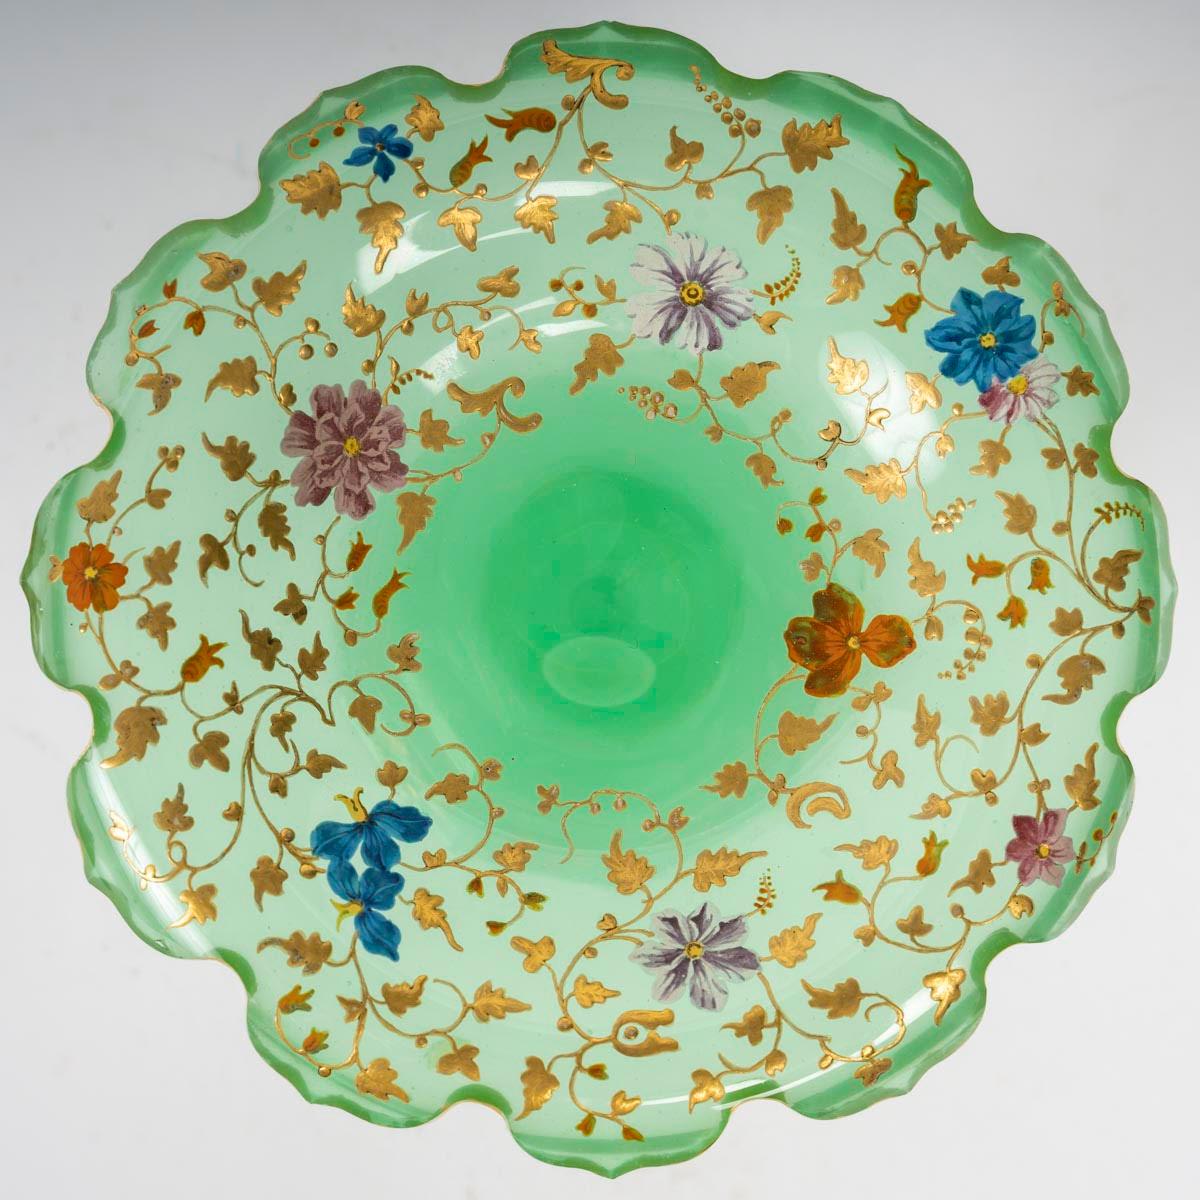 Green Bohemian crystal bowl, 19th century, Napoleon III period.

A green Bohemian crystal bowl with enamelled decoration of coloured flowers and gold foliage, 19th century, Napoleon III period.
H: 11cm D: 13cm